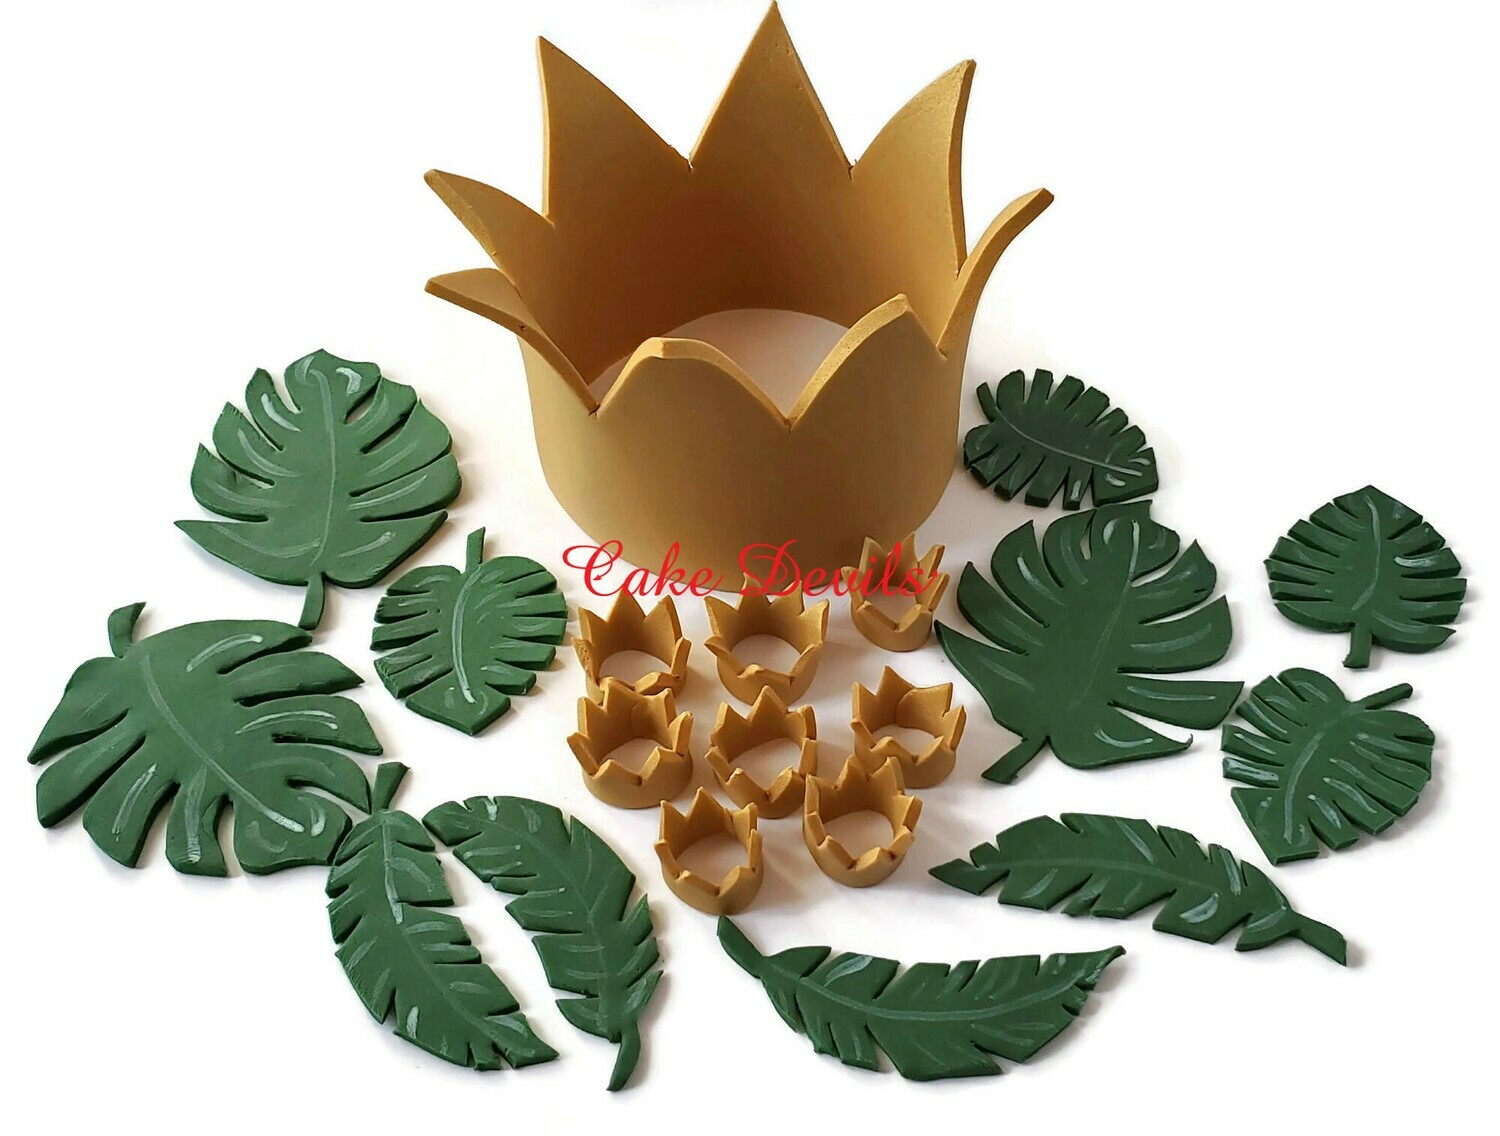 King of The Jungle Fondant Cake Toppers perfect for a Wild One Birthday Party, Fondant Crown, Monstera Leaves Cake Toppers, Palm Leaves